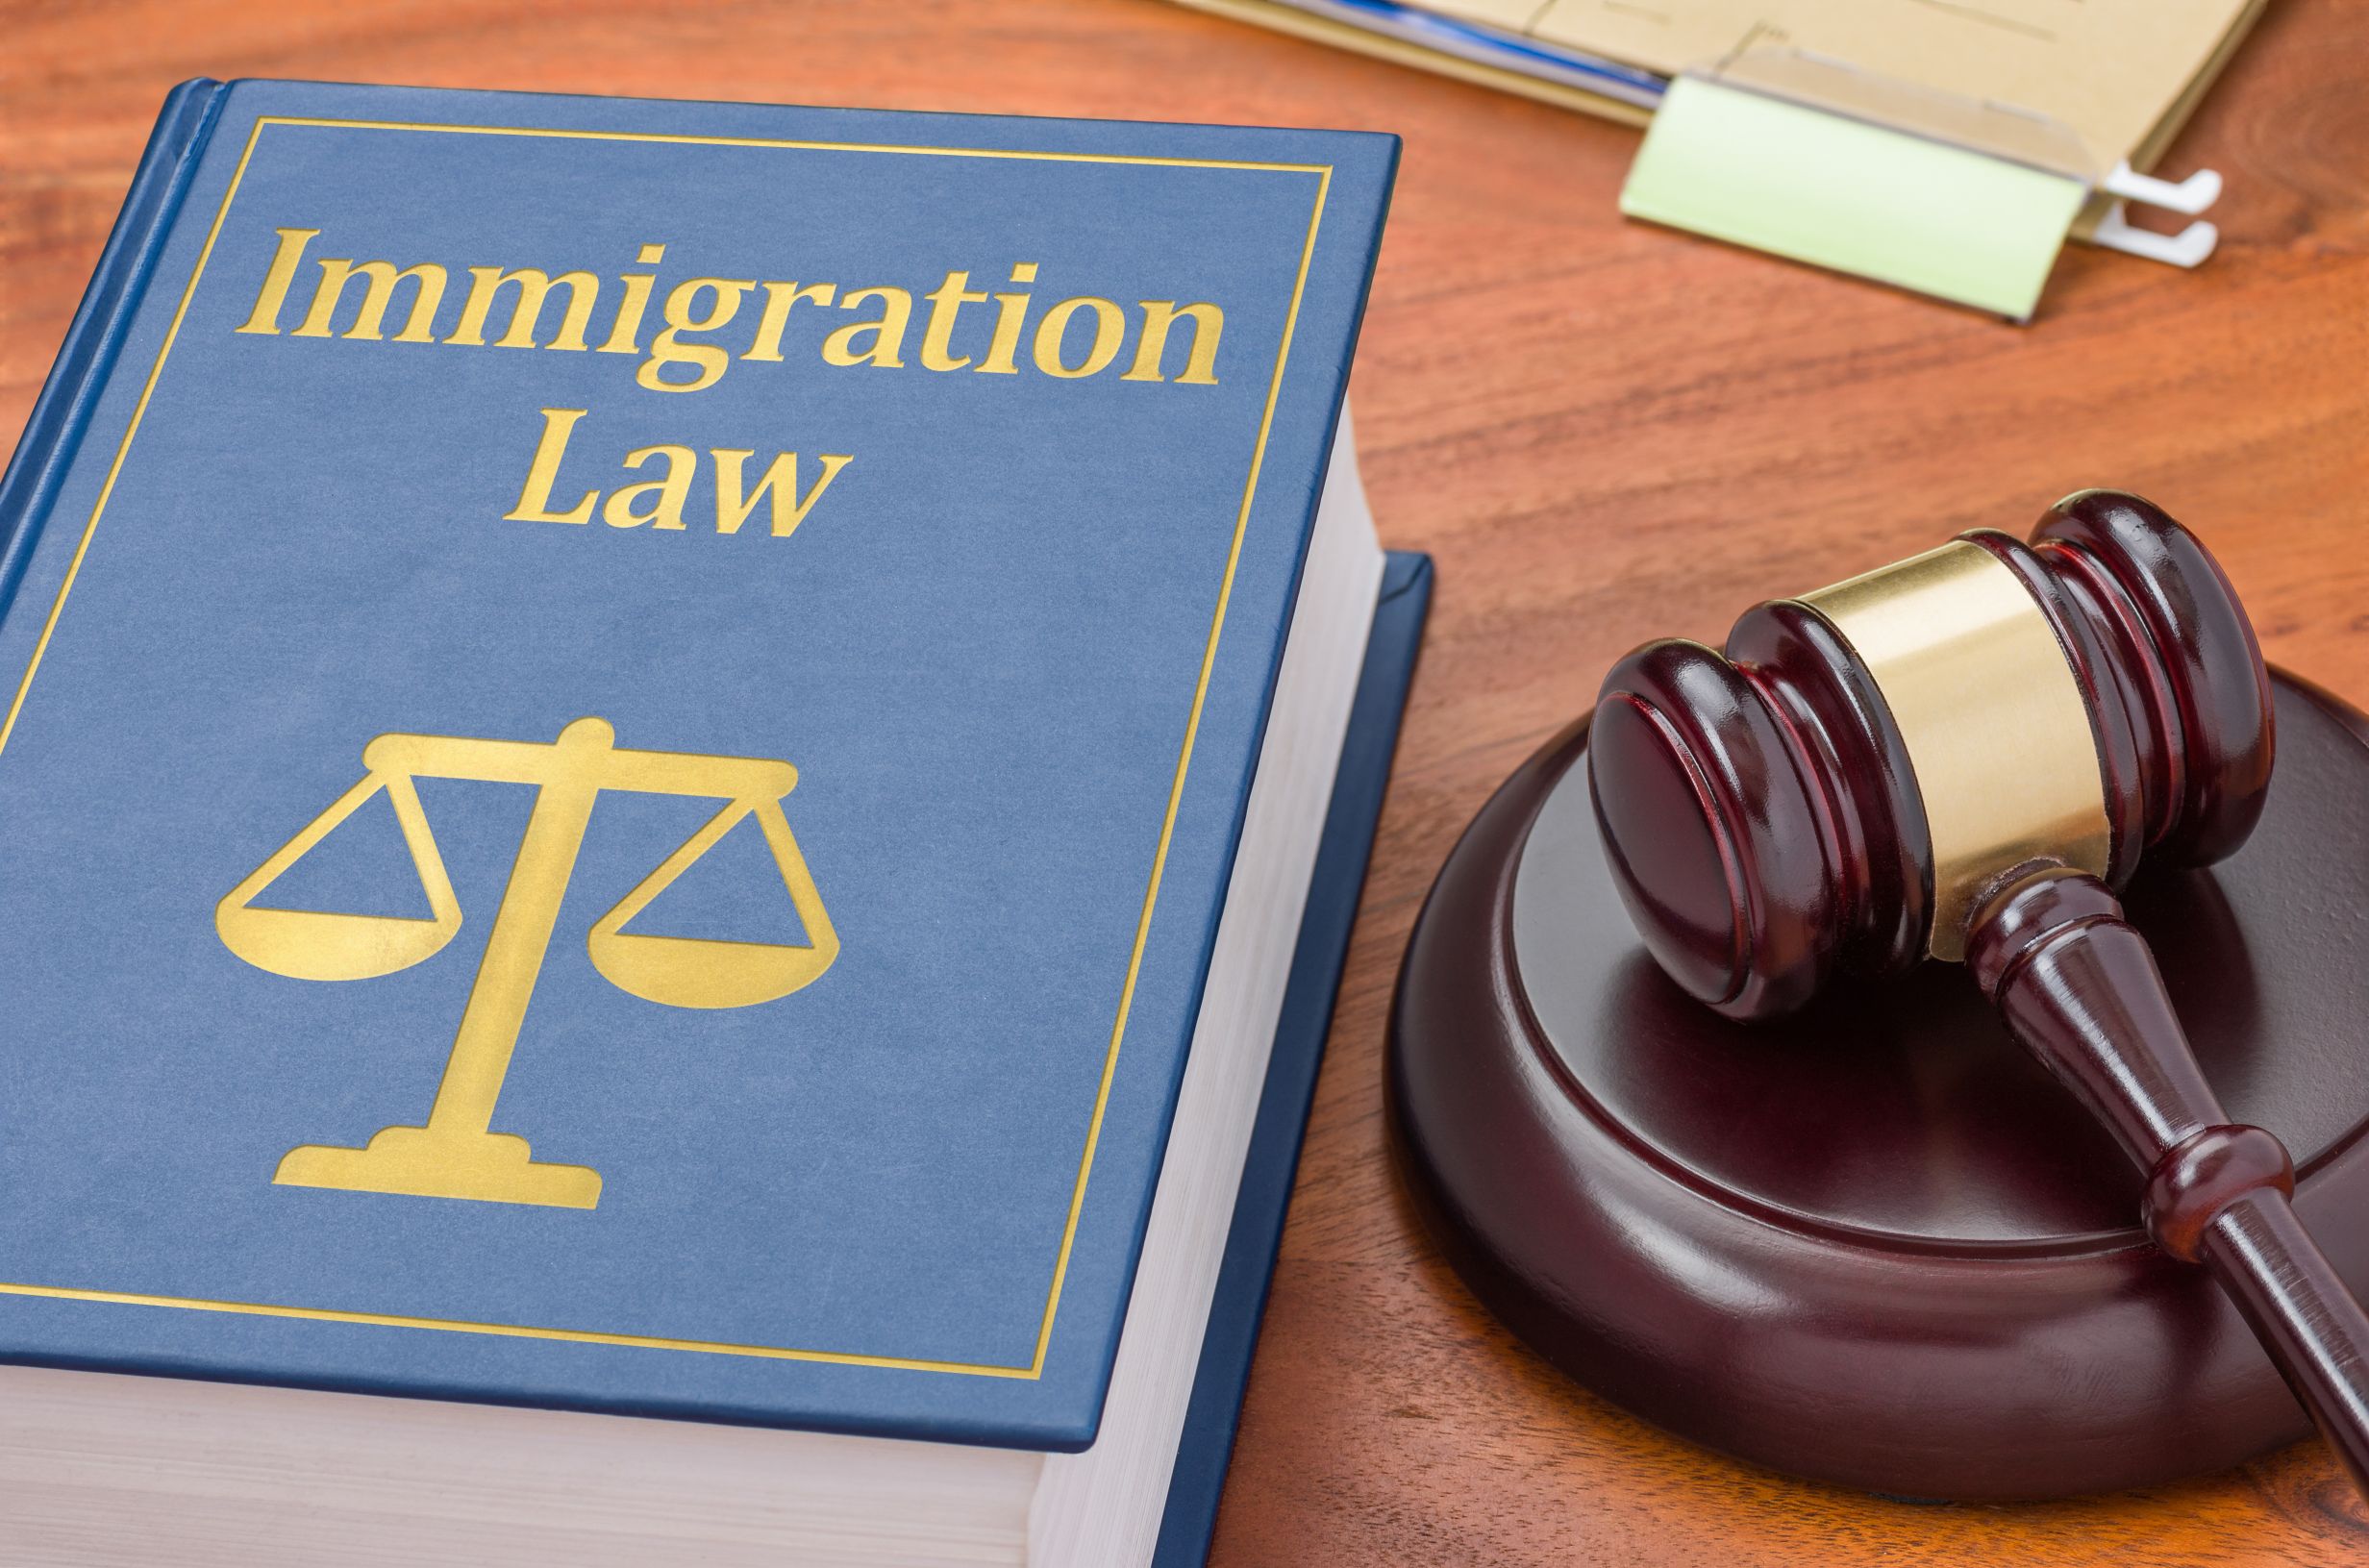 New Frontier Immigration Law reviews